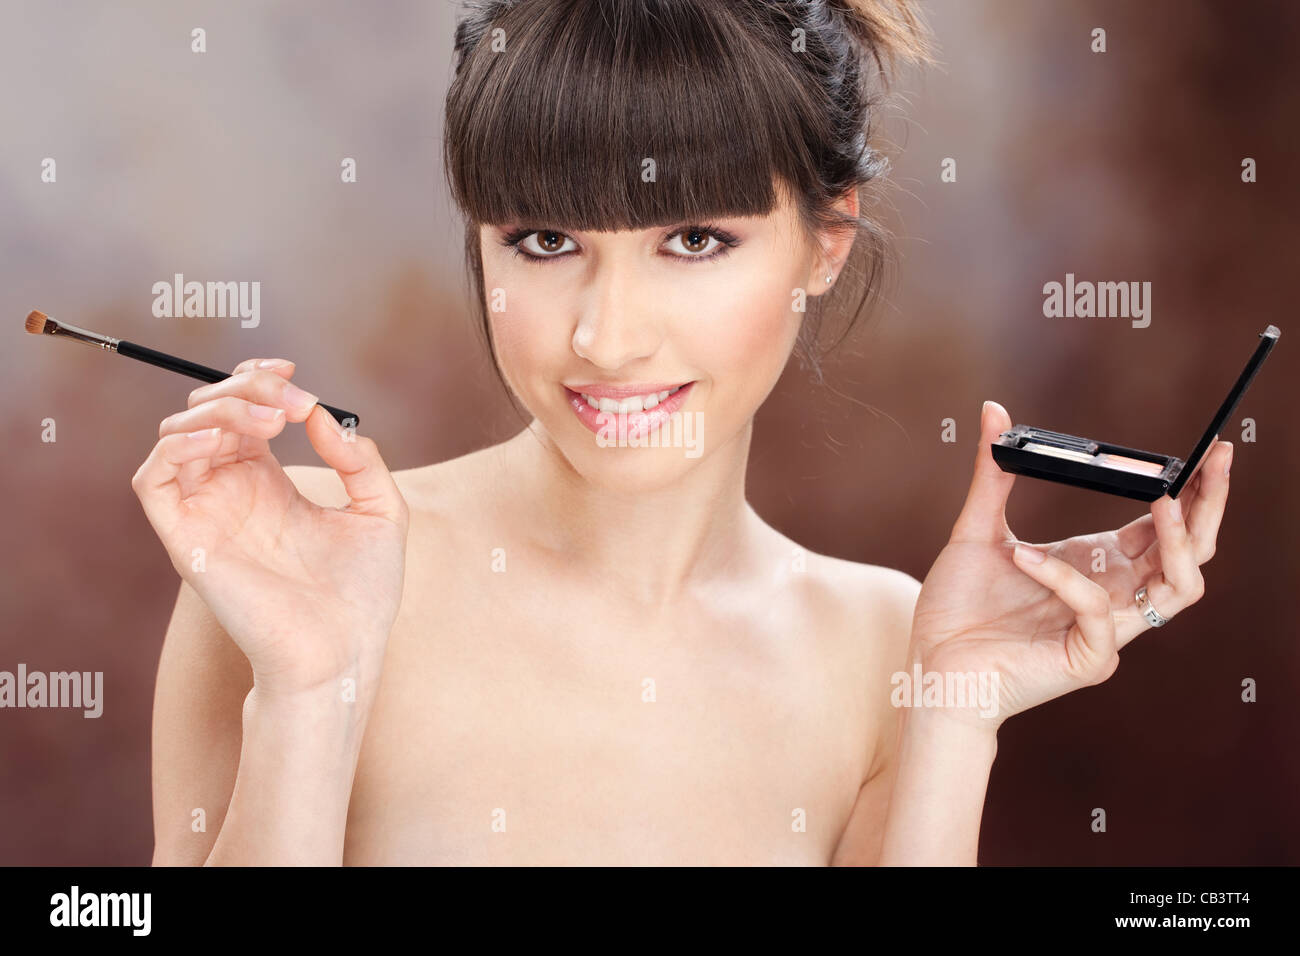 young pretty girl holding powder brush and makeup set Stock Photo